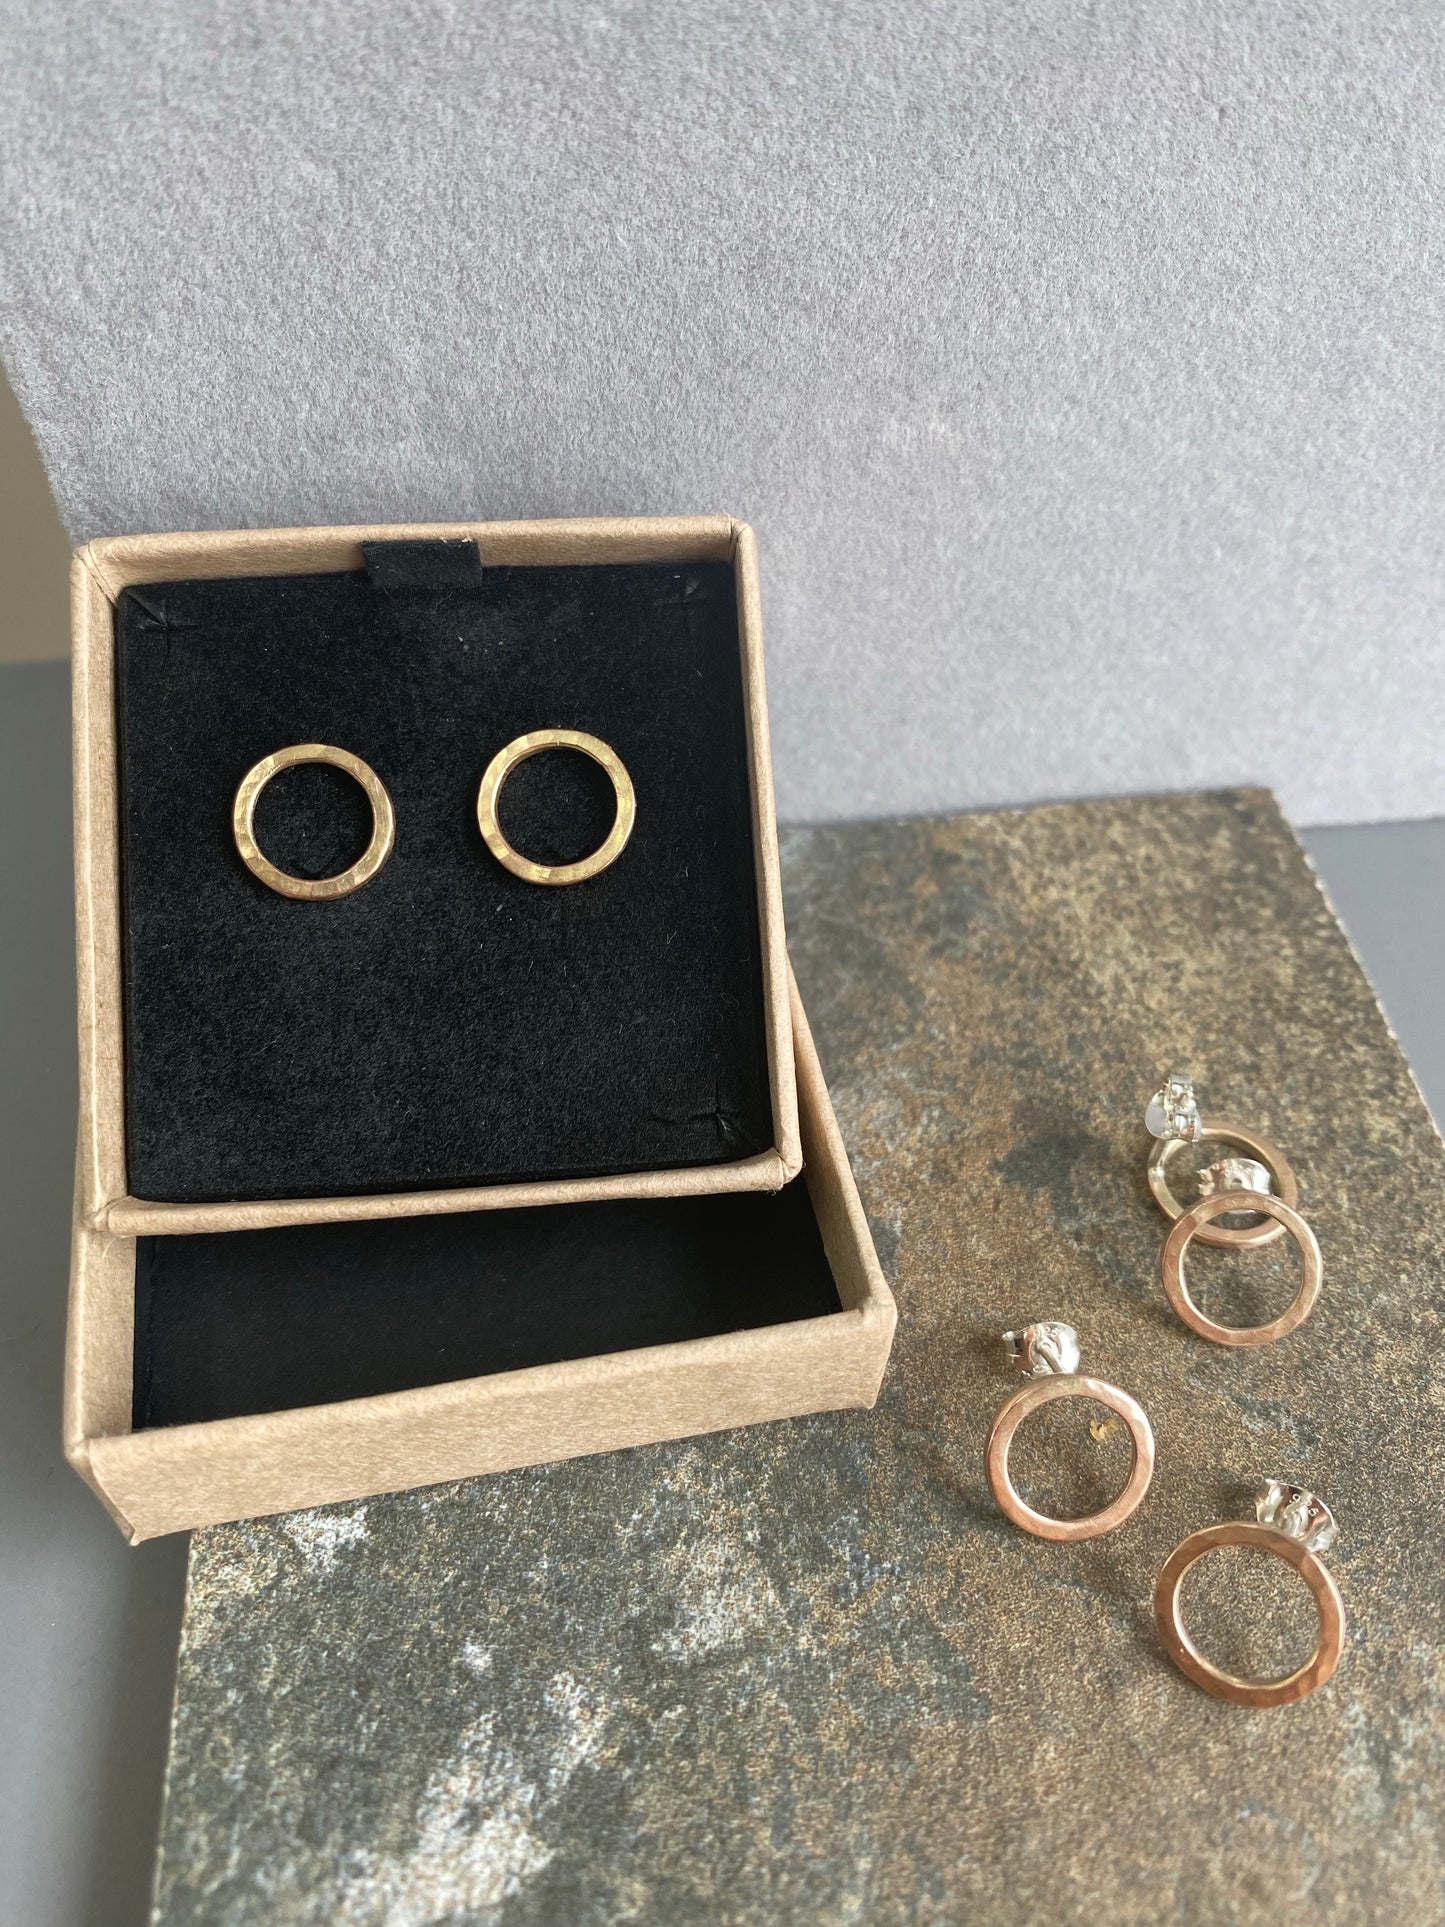 Solid 9ct Rose gold hammered circle studs